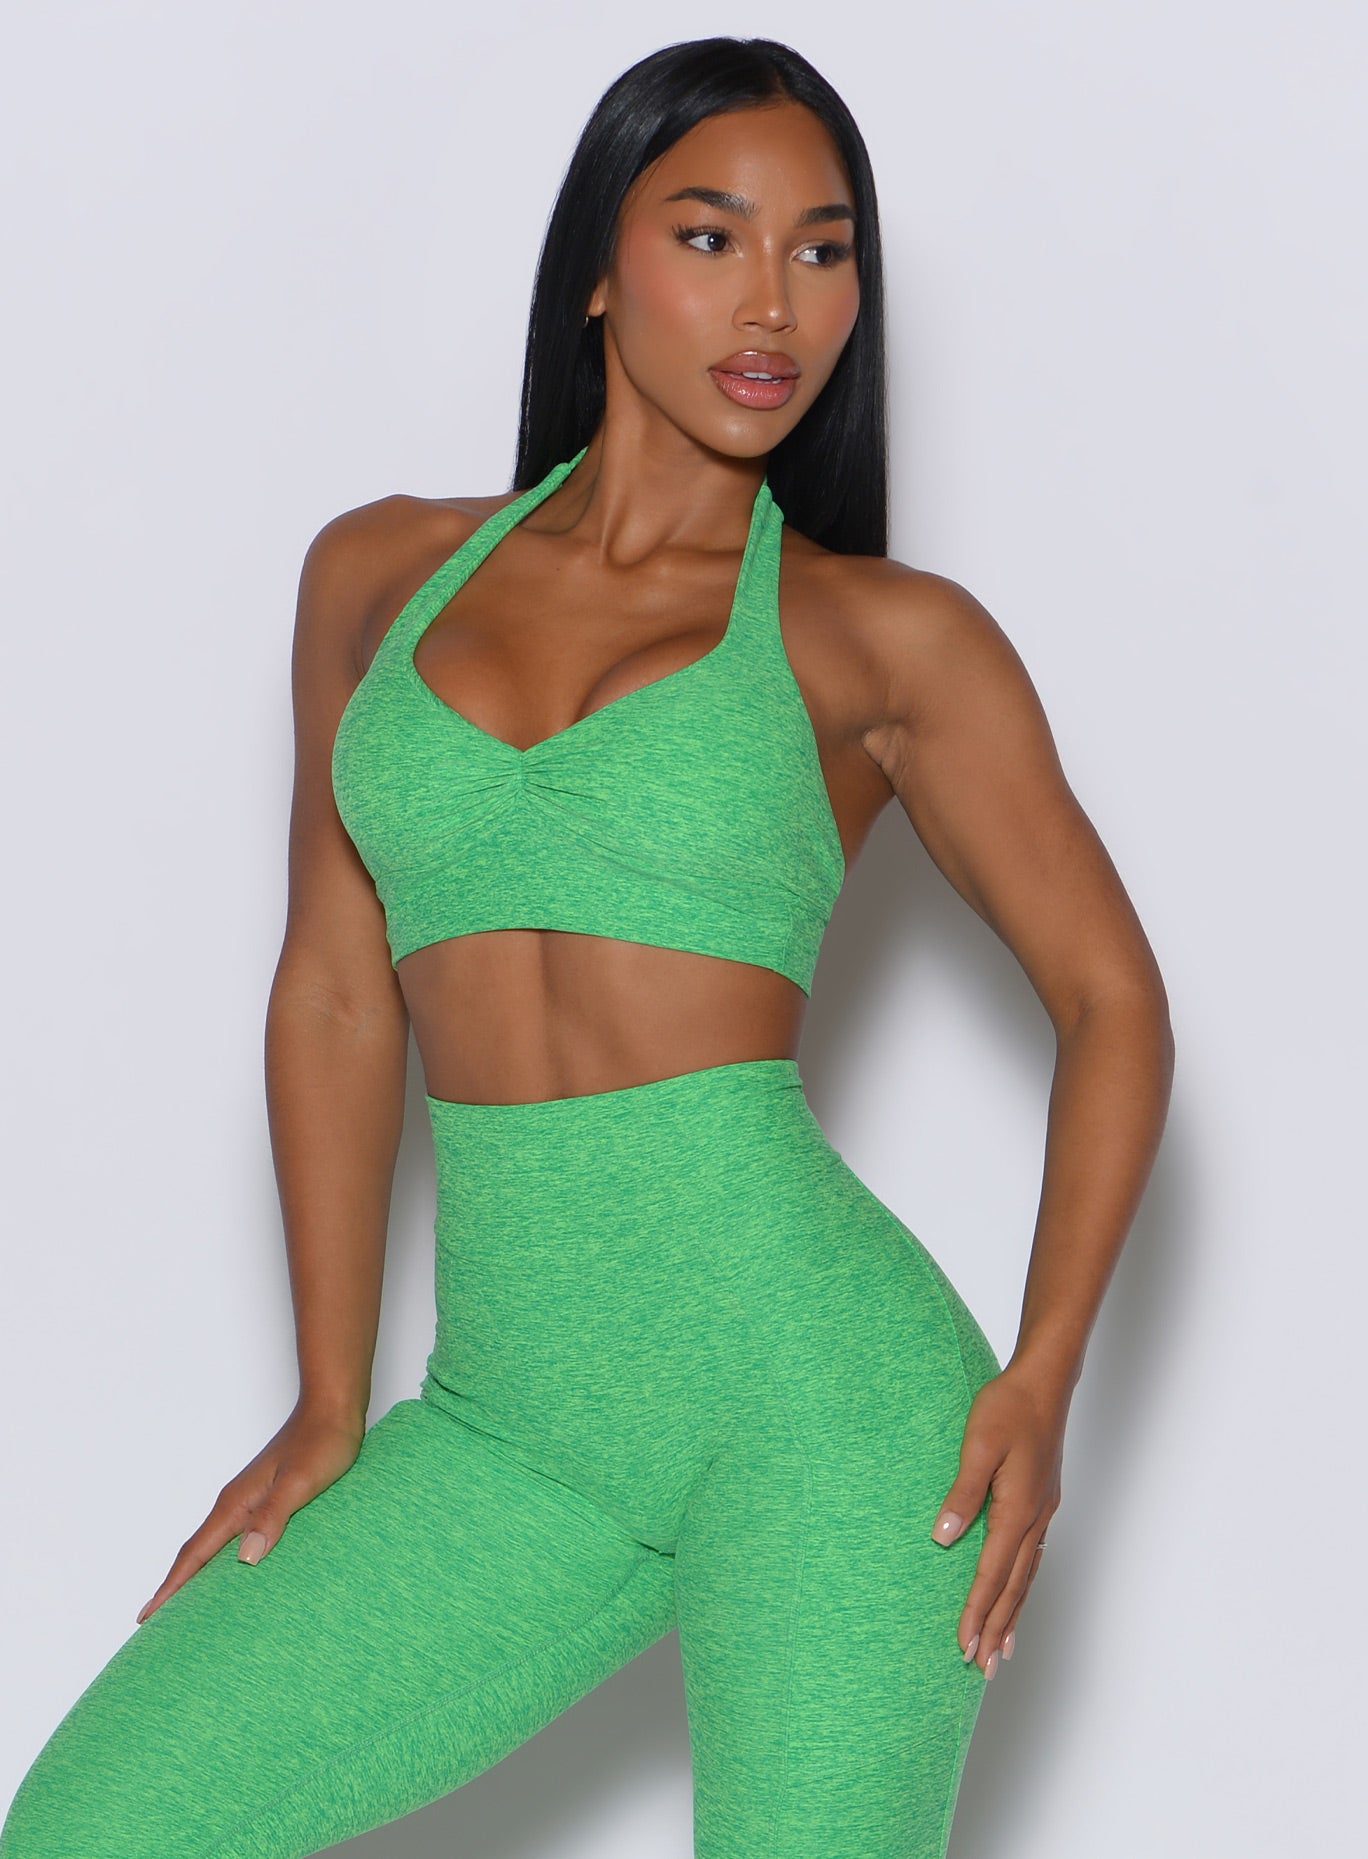 Front profile view of a model facing to her left wearing our backless bra in Neon Miami Beach color along with the matching leggings